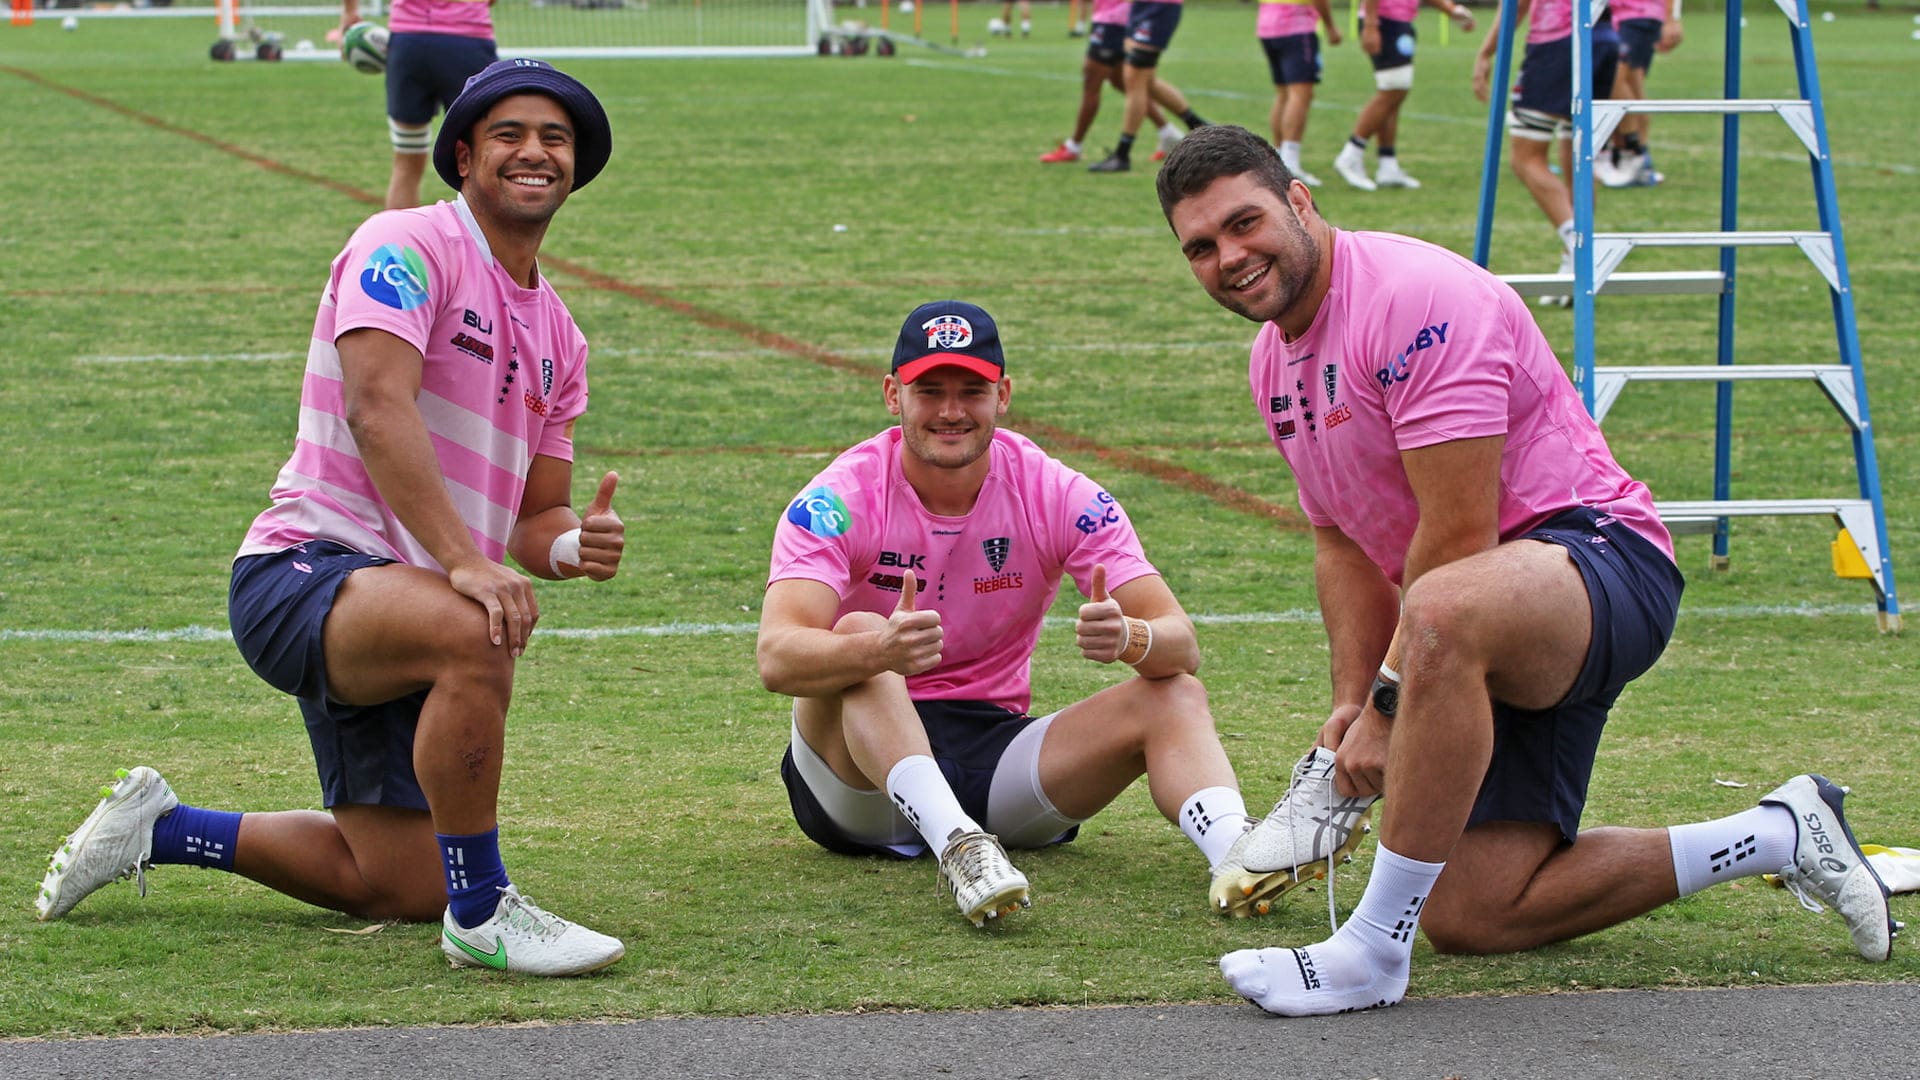 The Melbourne Rebels give Grip Star socks the thumbs up as they tackle the world's best rugby players.